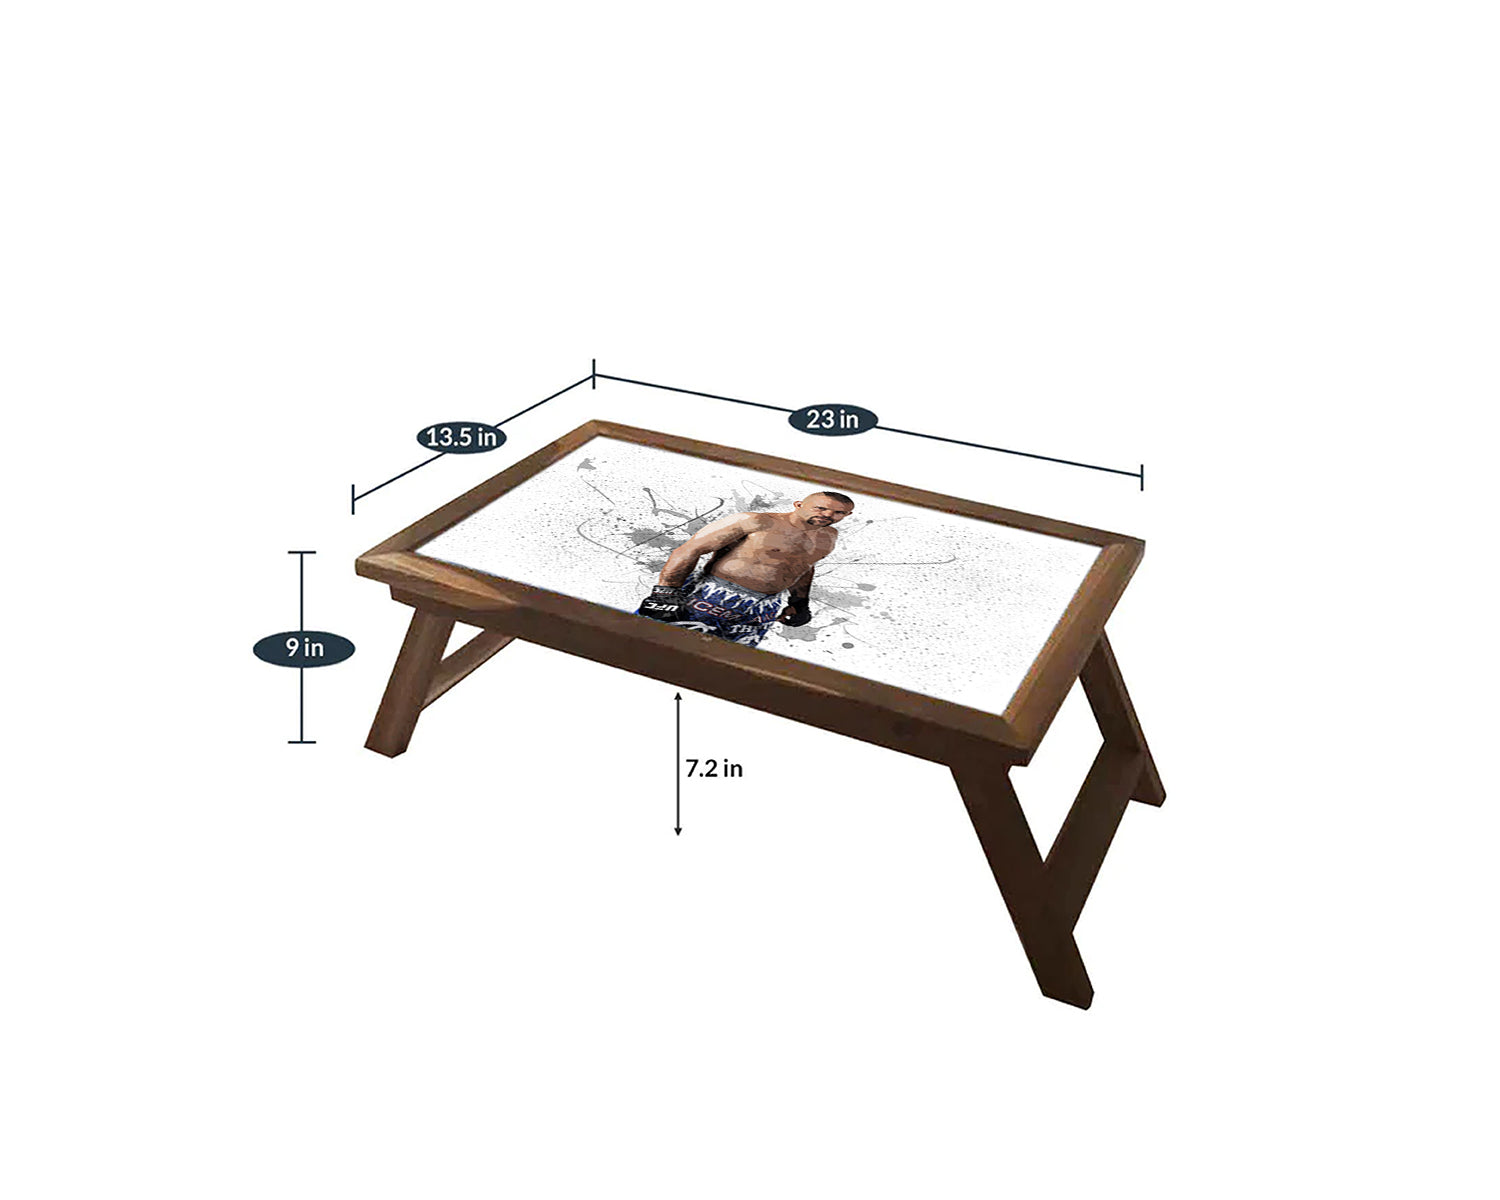 Chuck Liddell Splash Effect Coffee and Laptop Table 